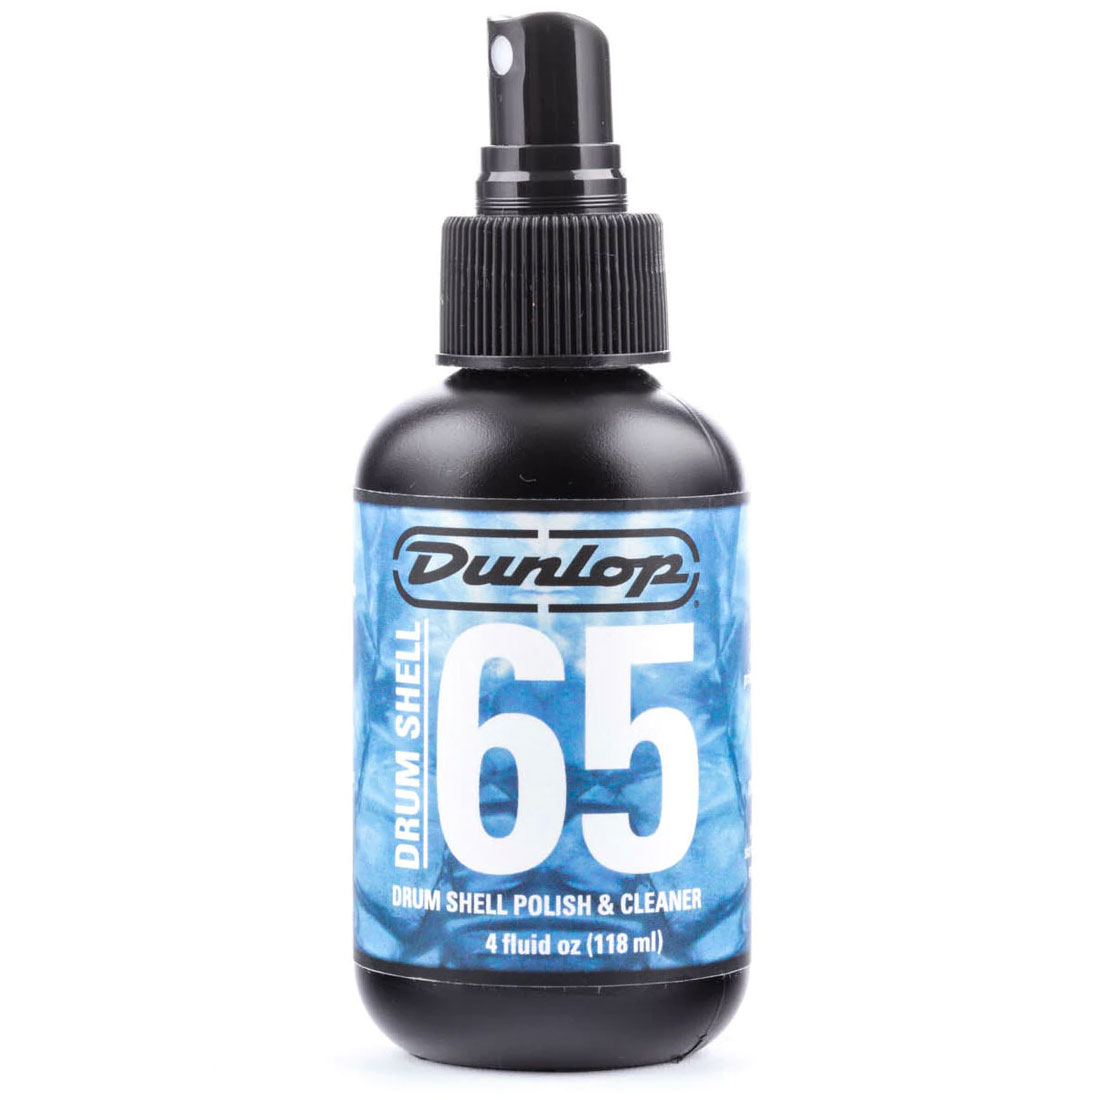  /   DUNLOP 6444 FORMULA 65 DRUM SHELL POLISH AND CLEANER